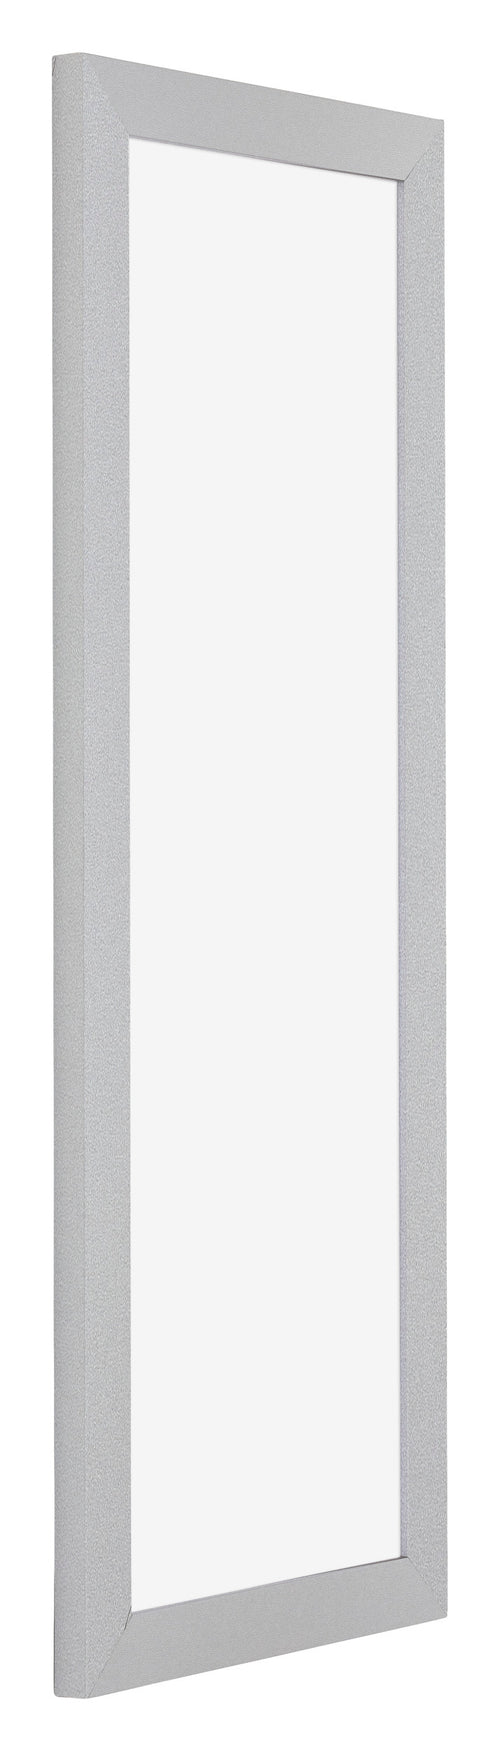 Mura MDF Photo Frame 25x75cm White High Gloss Front Oblique | Yourdecoration.co.uk